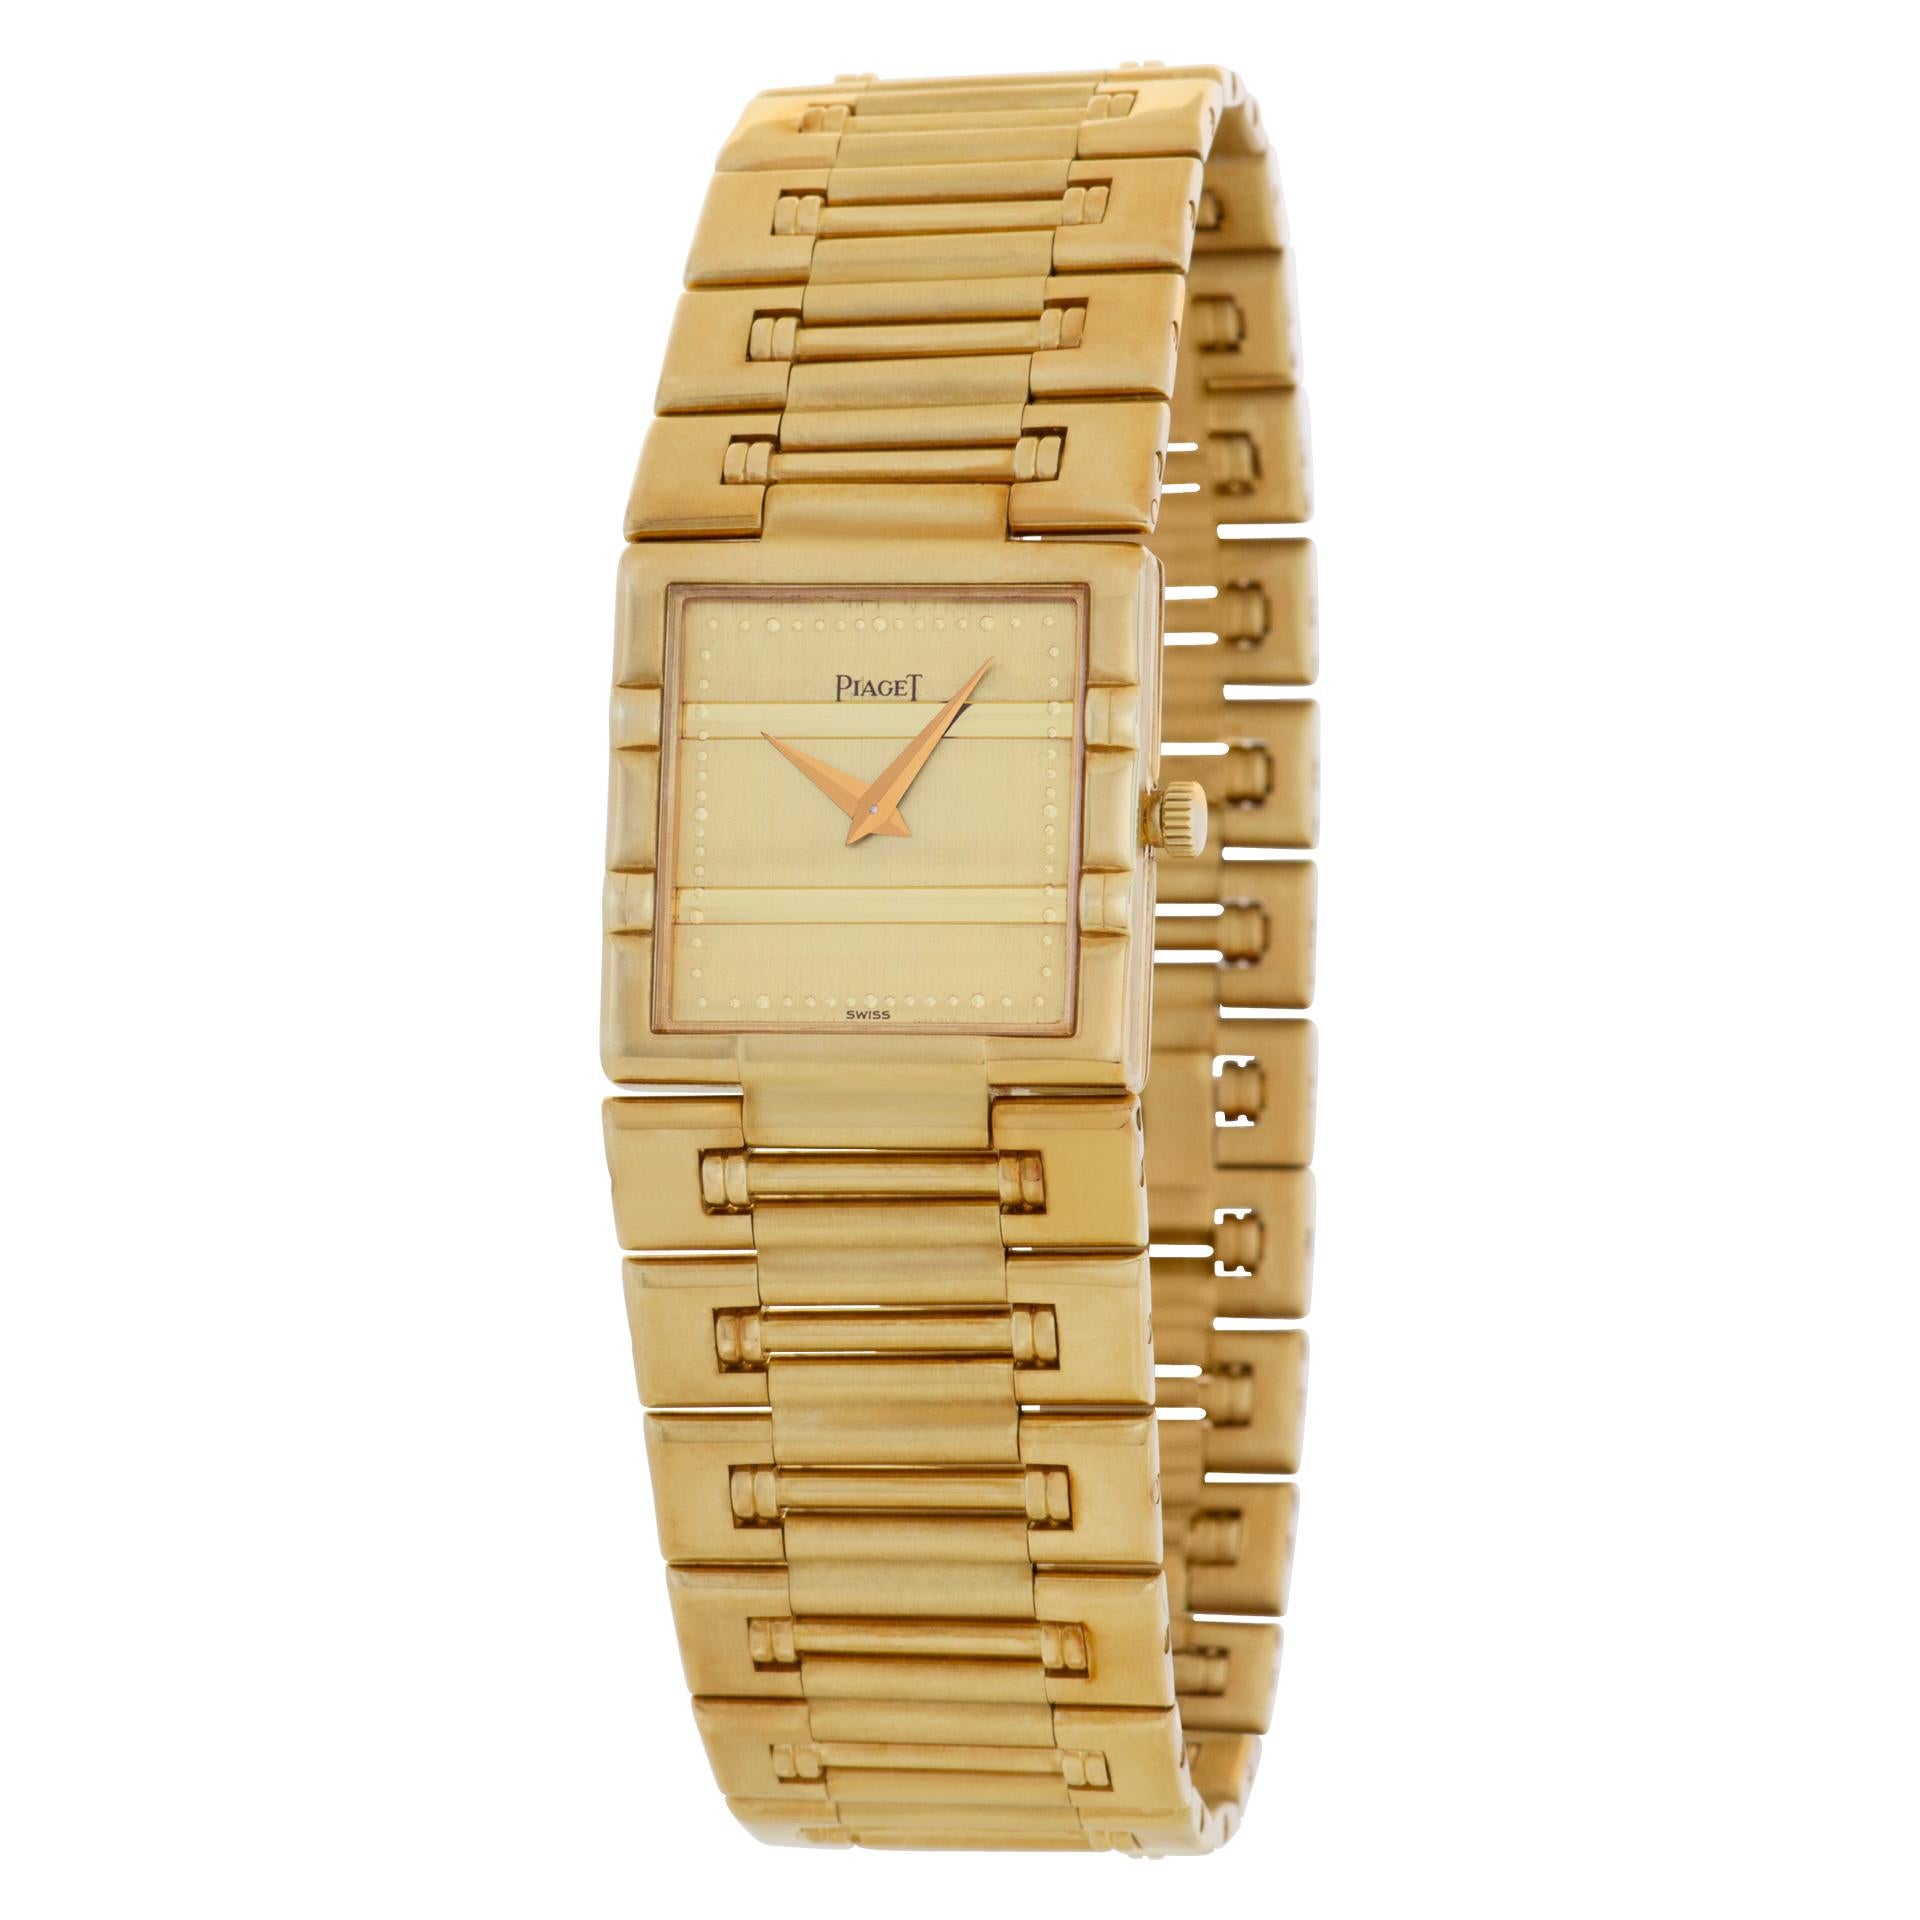 Piaget Dancer in 18k. Quartz. 23 mm case size. With papers. Ref 80317K81. Circa 1990's Fine Pre-owned Piaget Watch. Certified preowned Classic Piaget Dancer 80317K81 watch is made out of yellow gold on a 18k bracelet with a 18k Clasp buckle. This